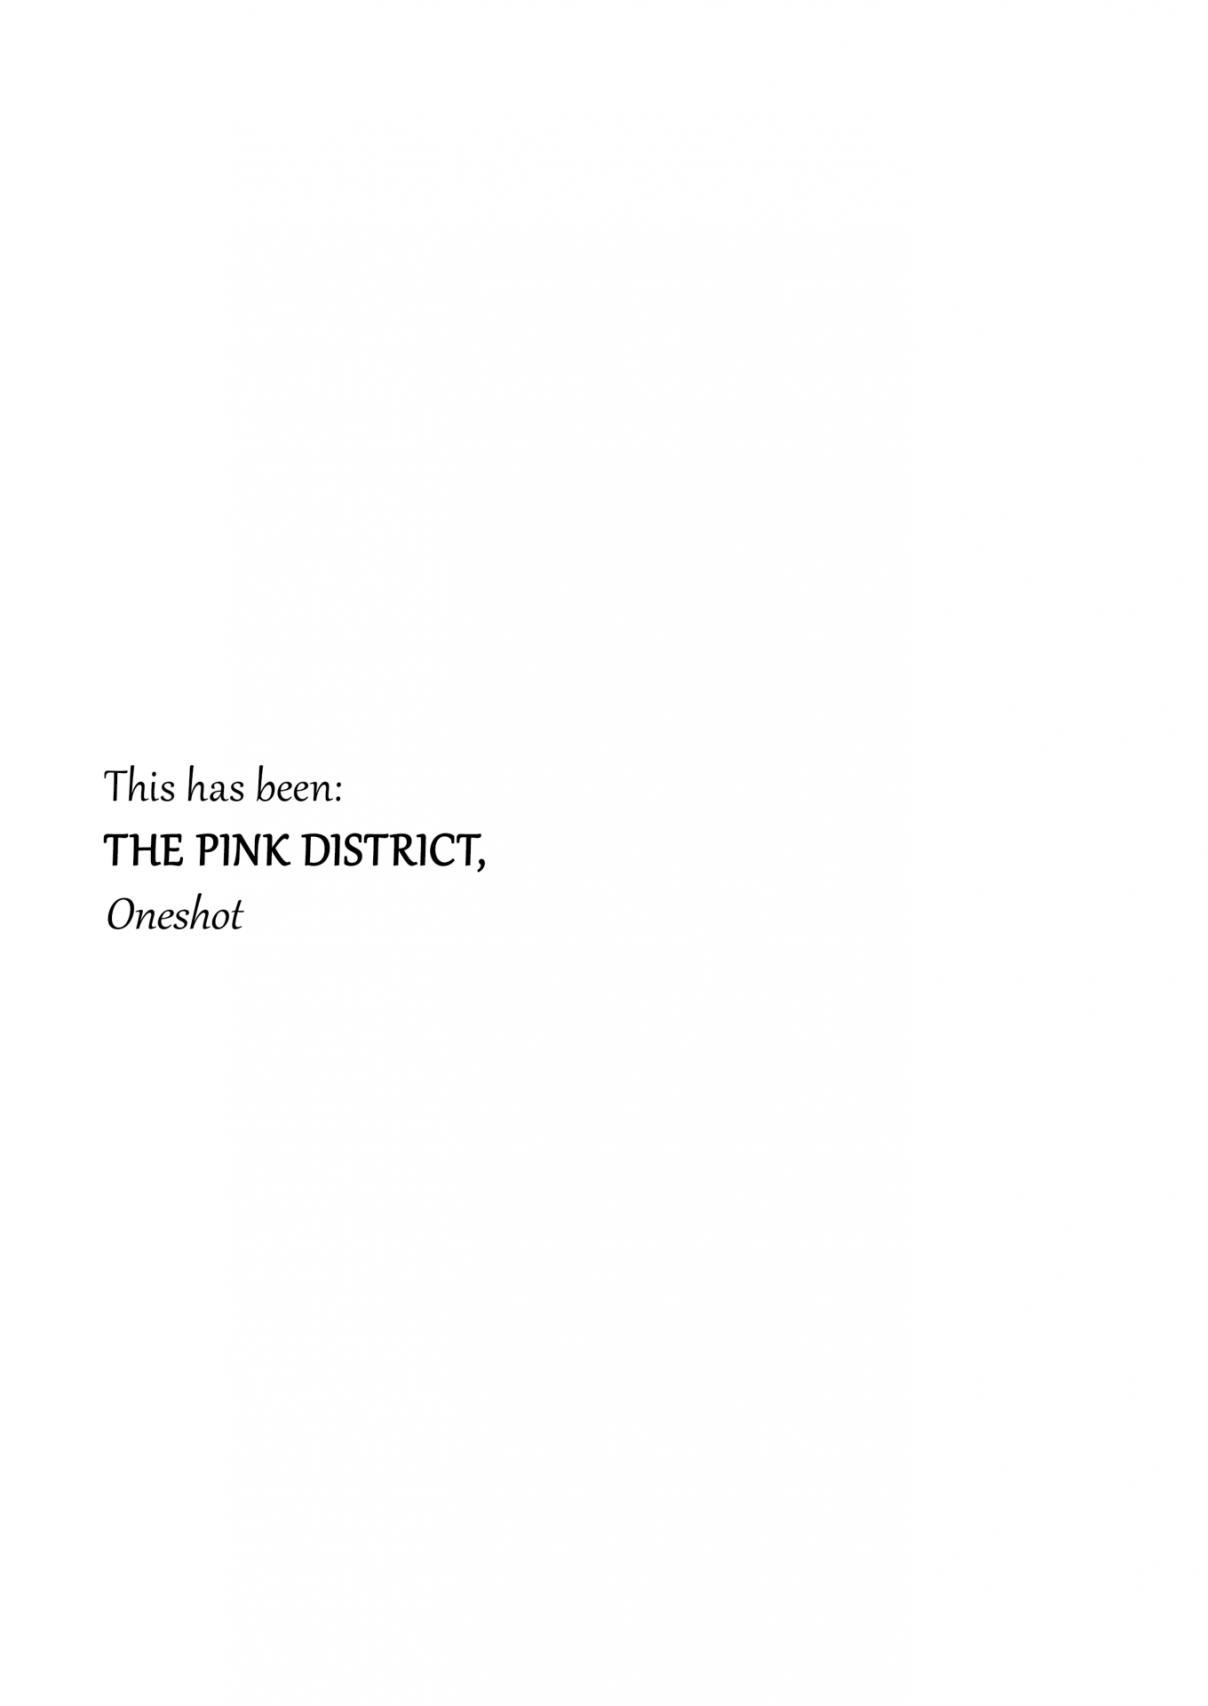 THE PINK DISTRICT